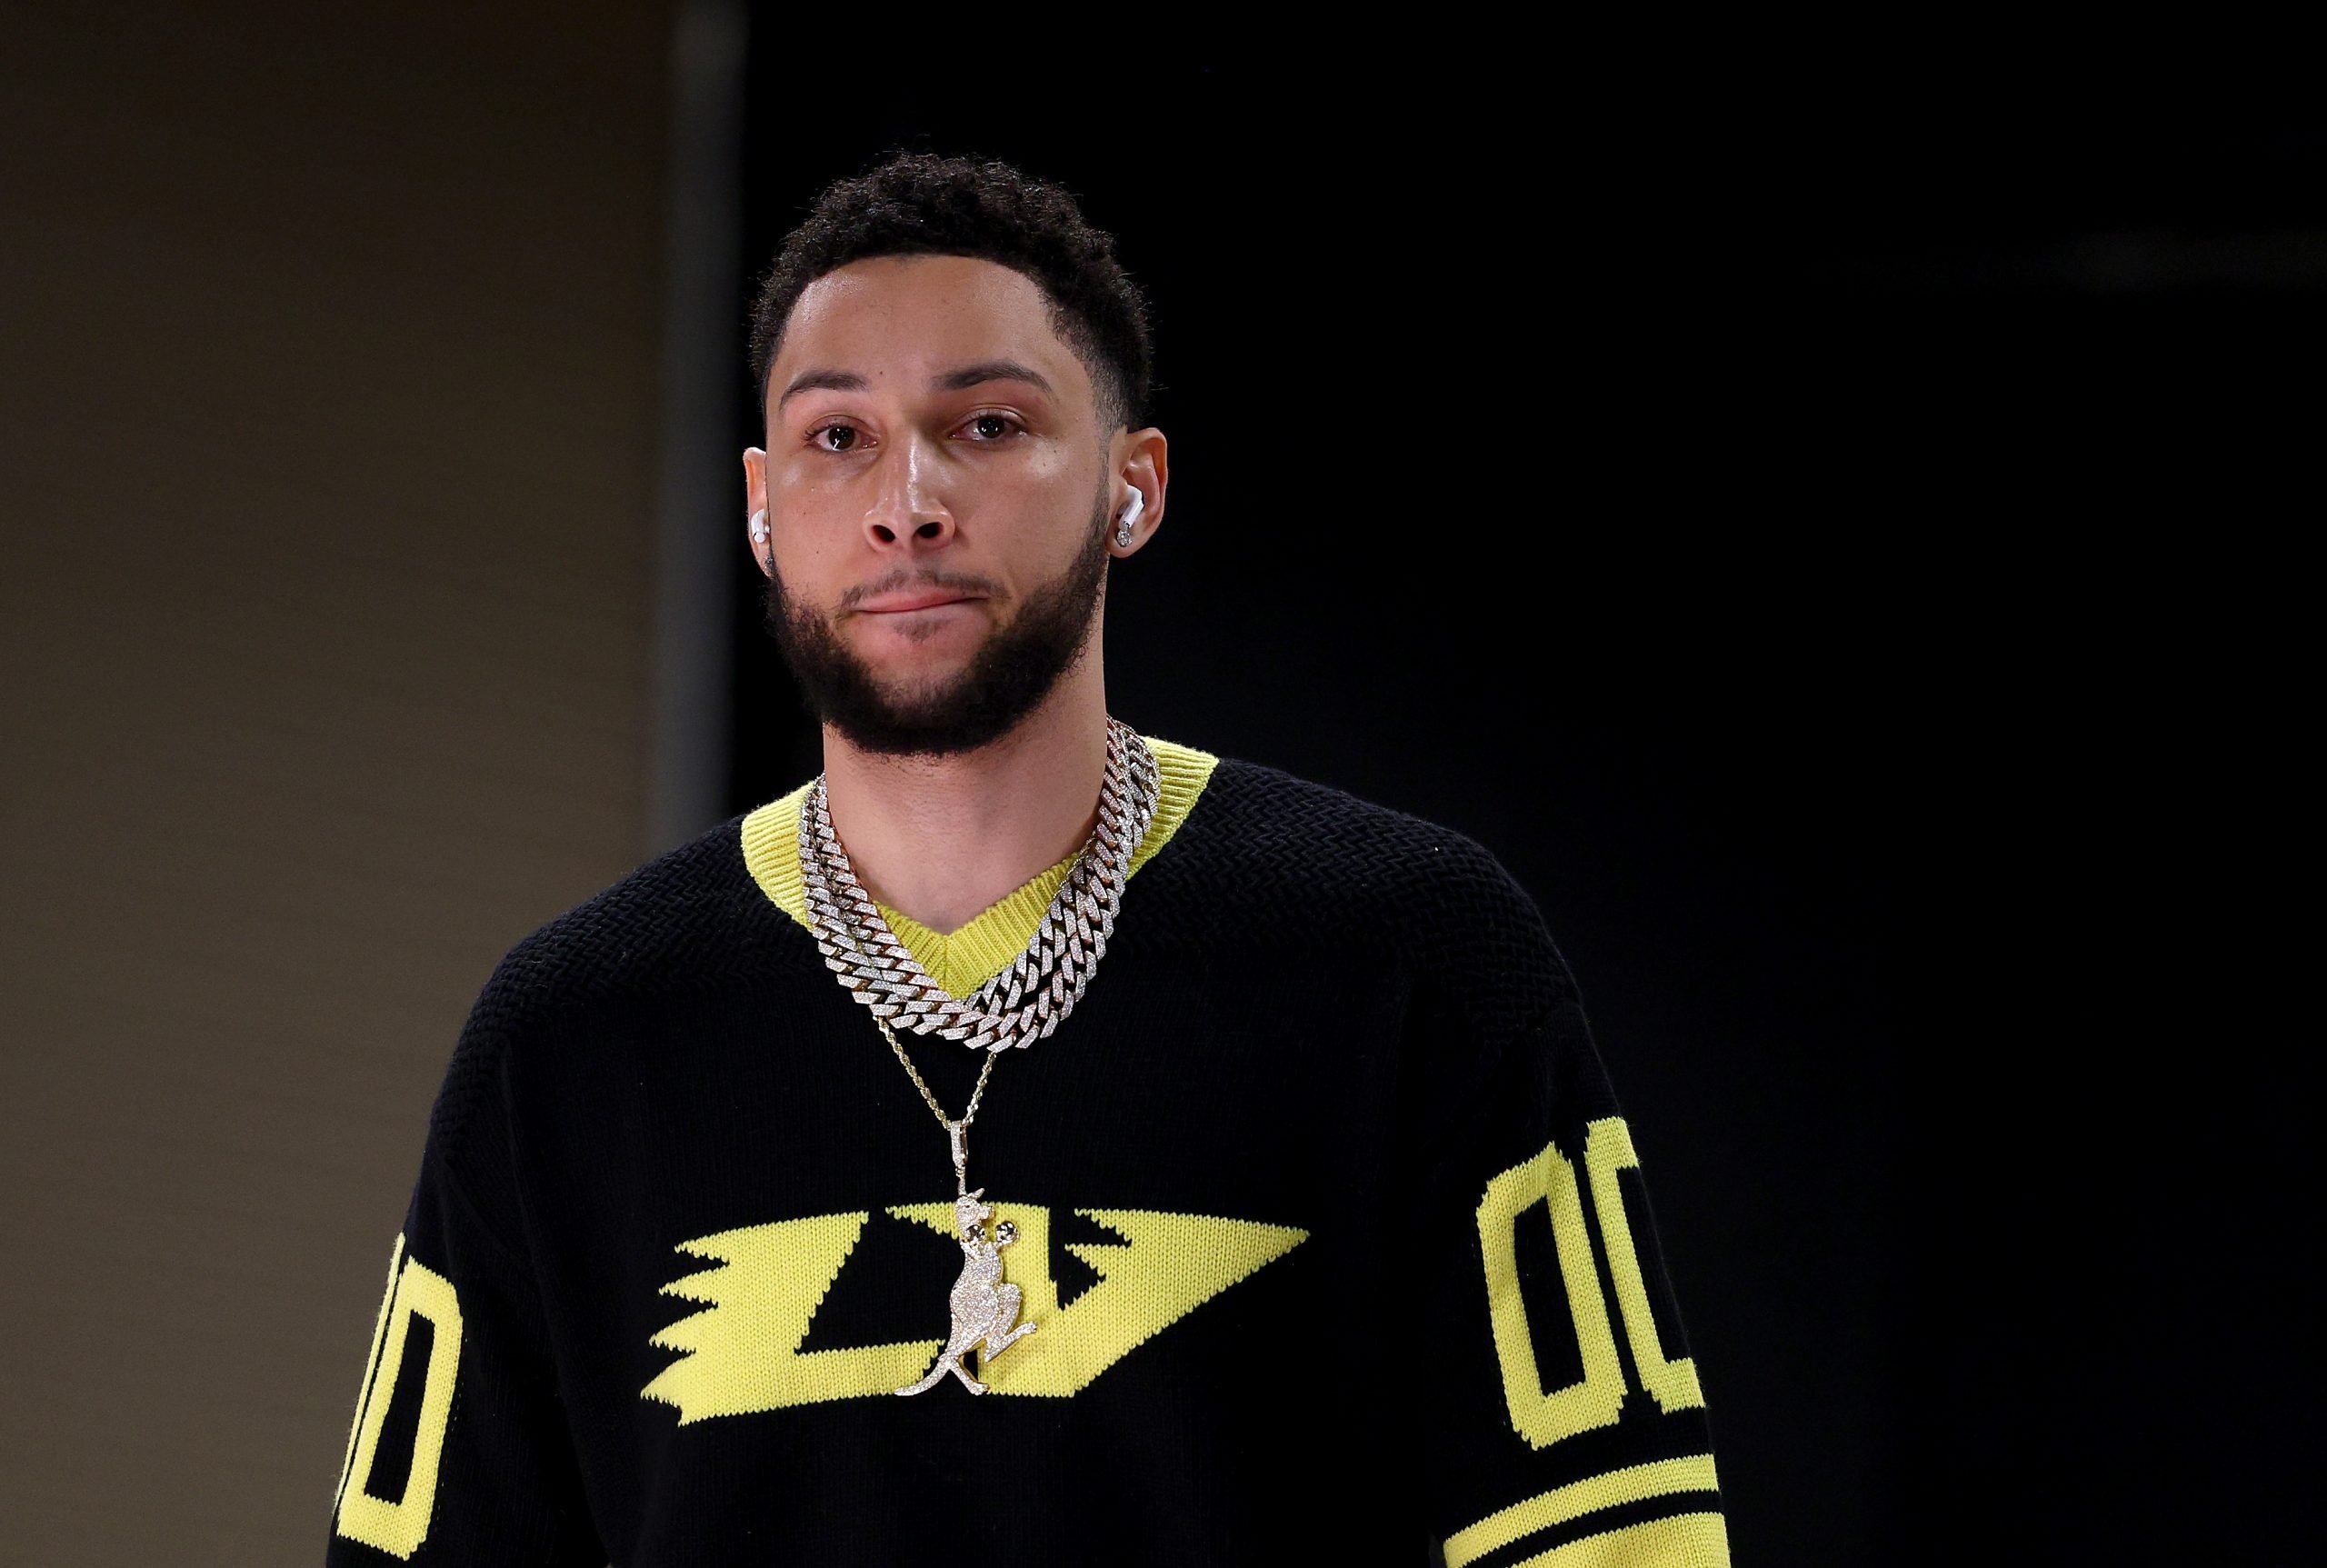 Inside NBA Player Ben Simmons Los Angeles Mansion He's Selling For $23  Million